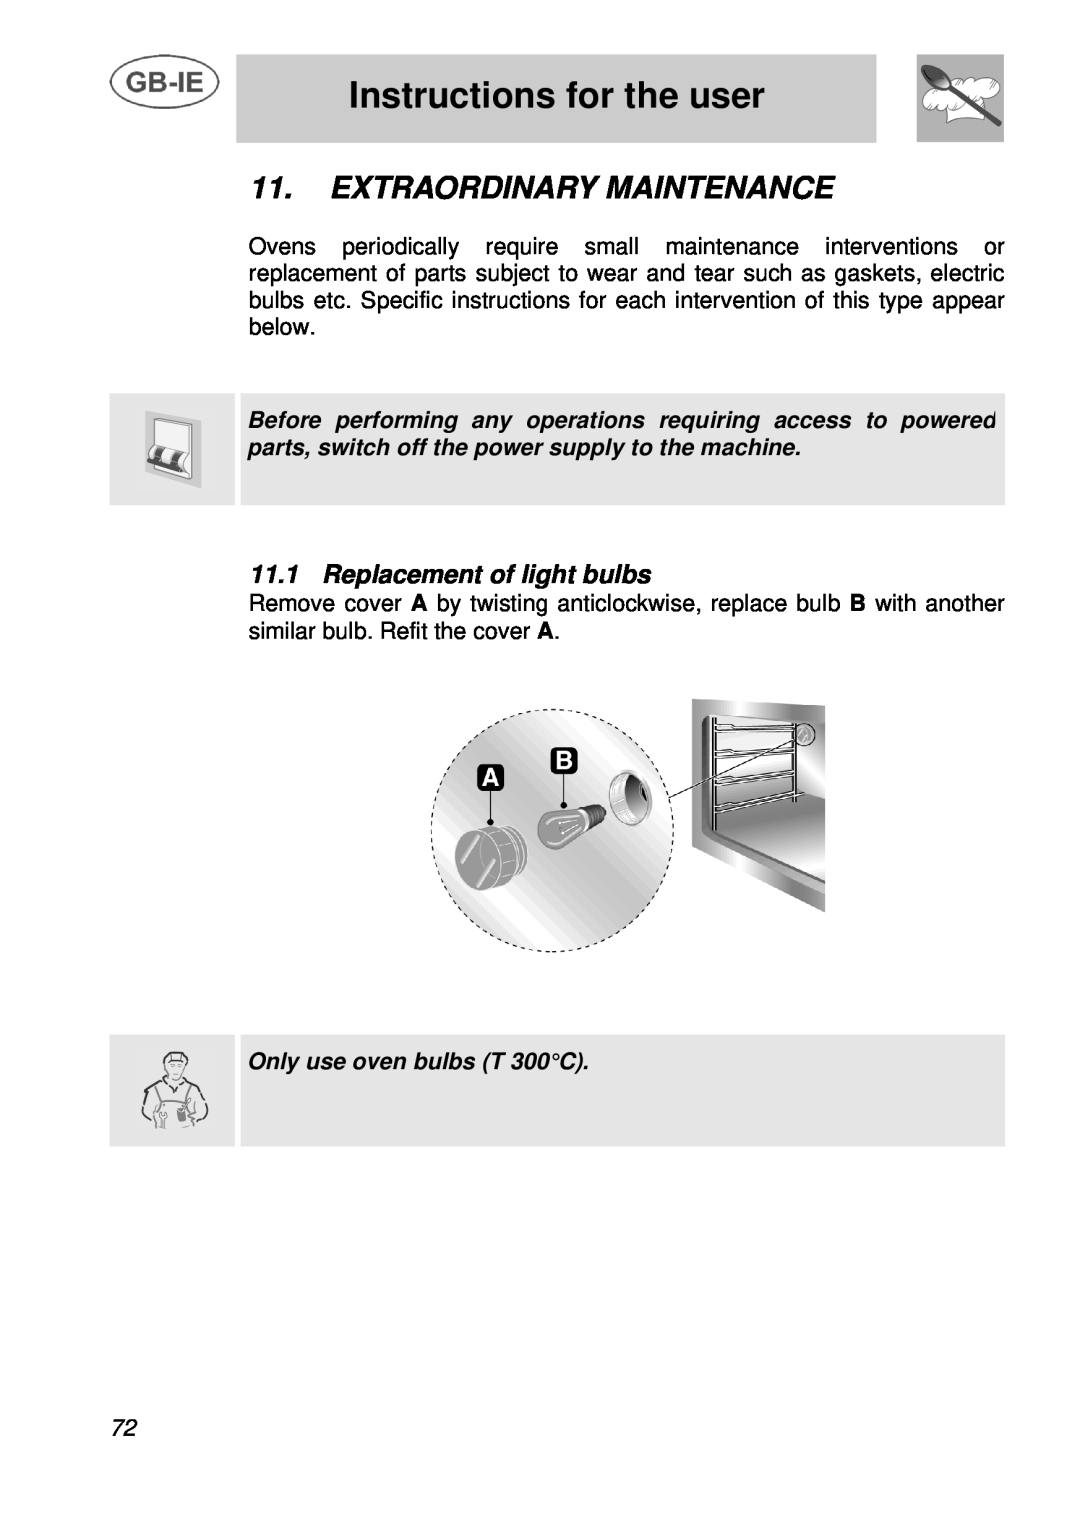 Smeg A3 manual Extraordinary Maintenance, Replacement of light bulbs, Instructions for the user 